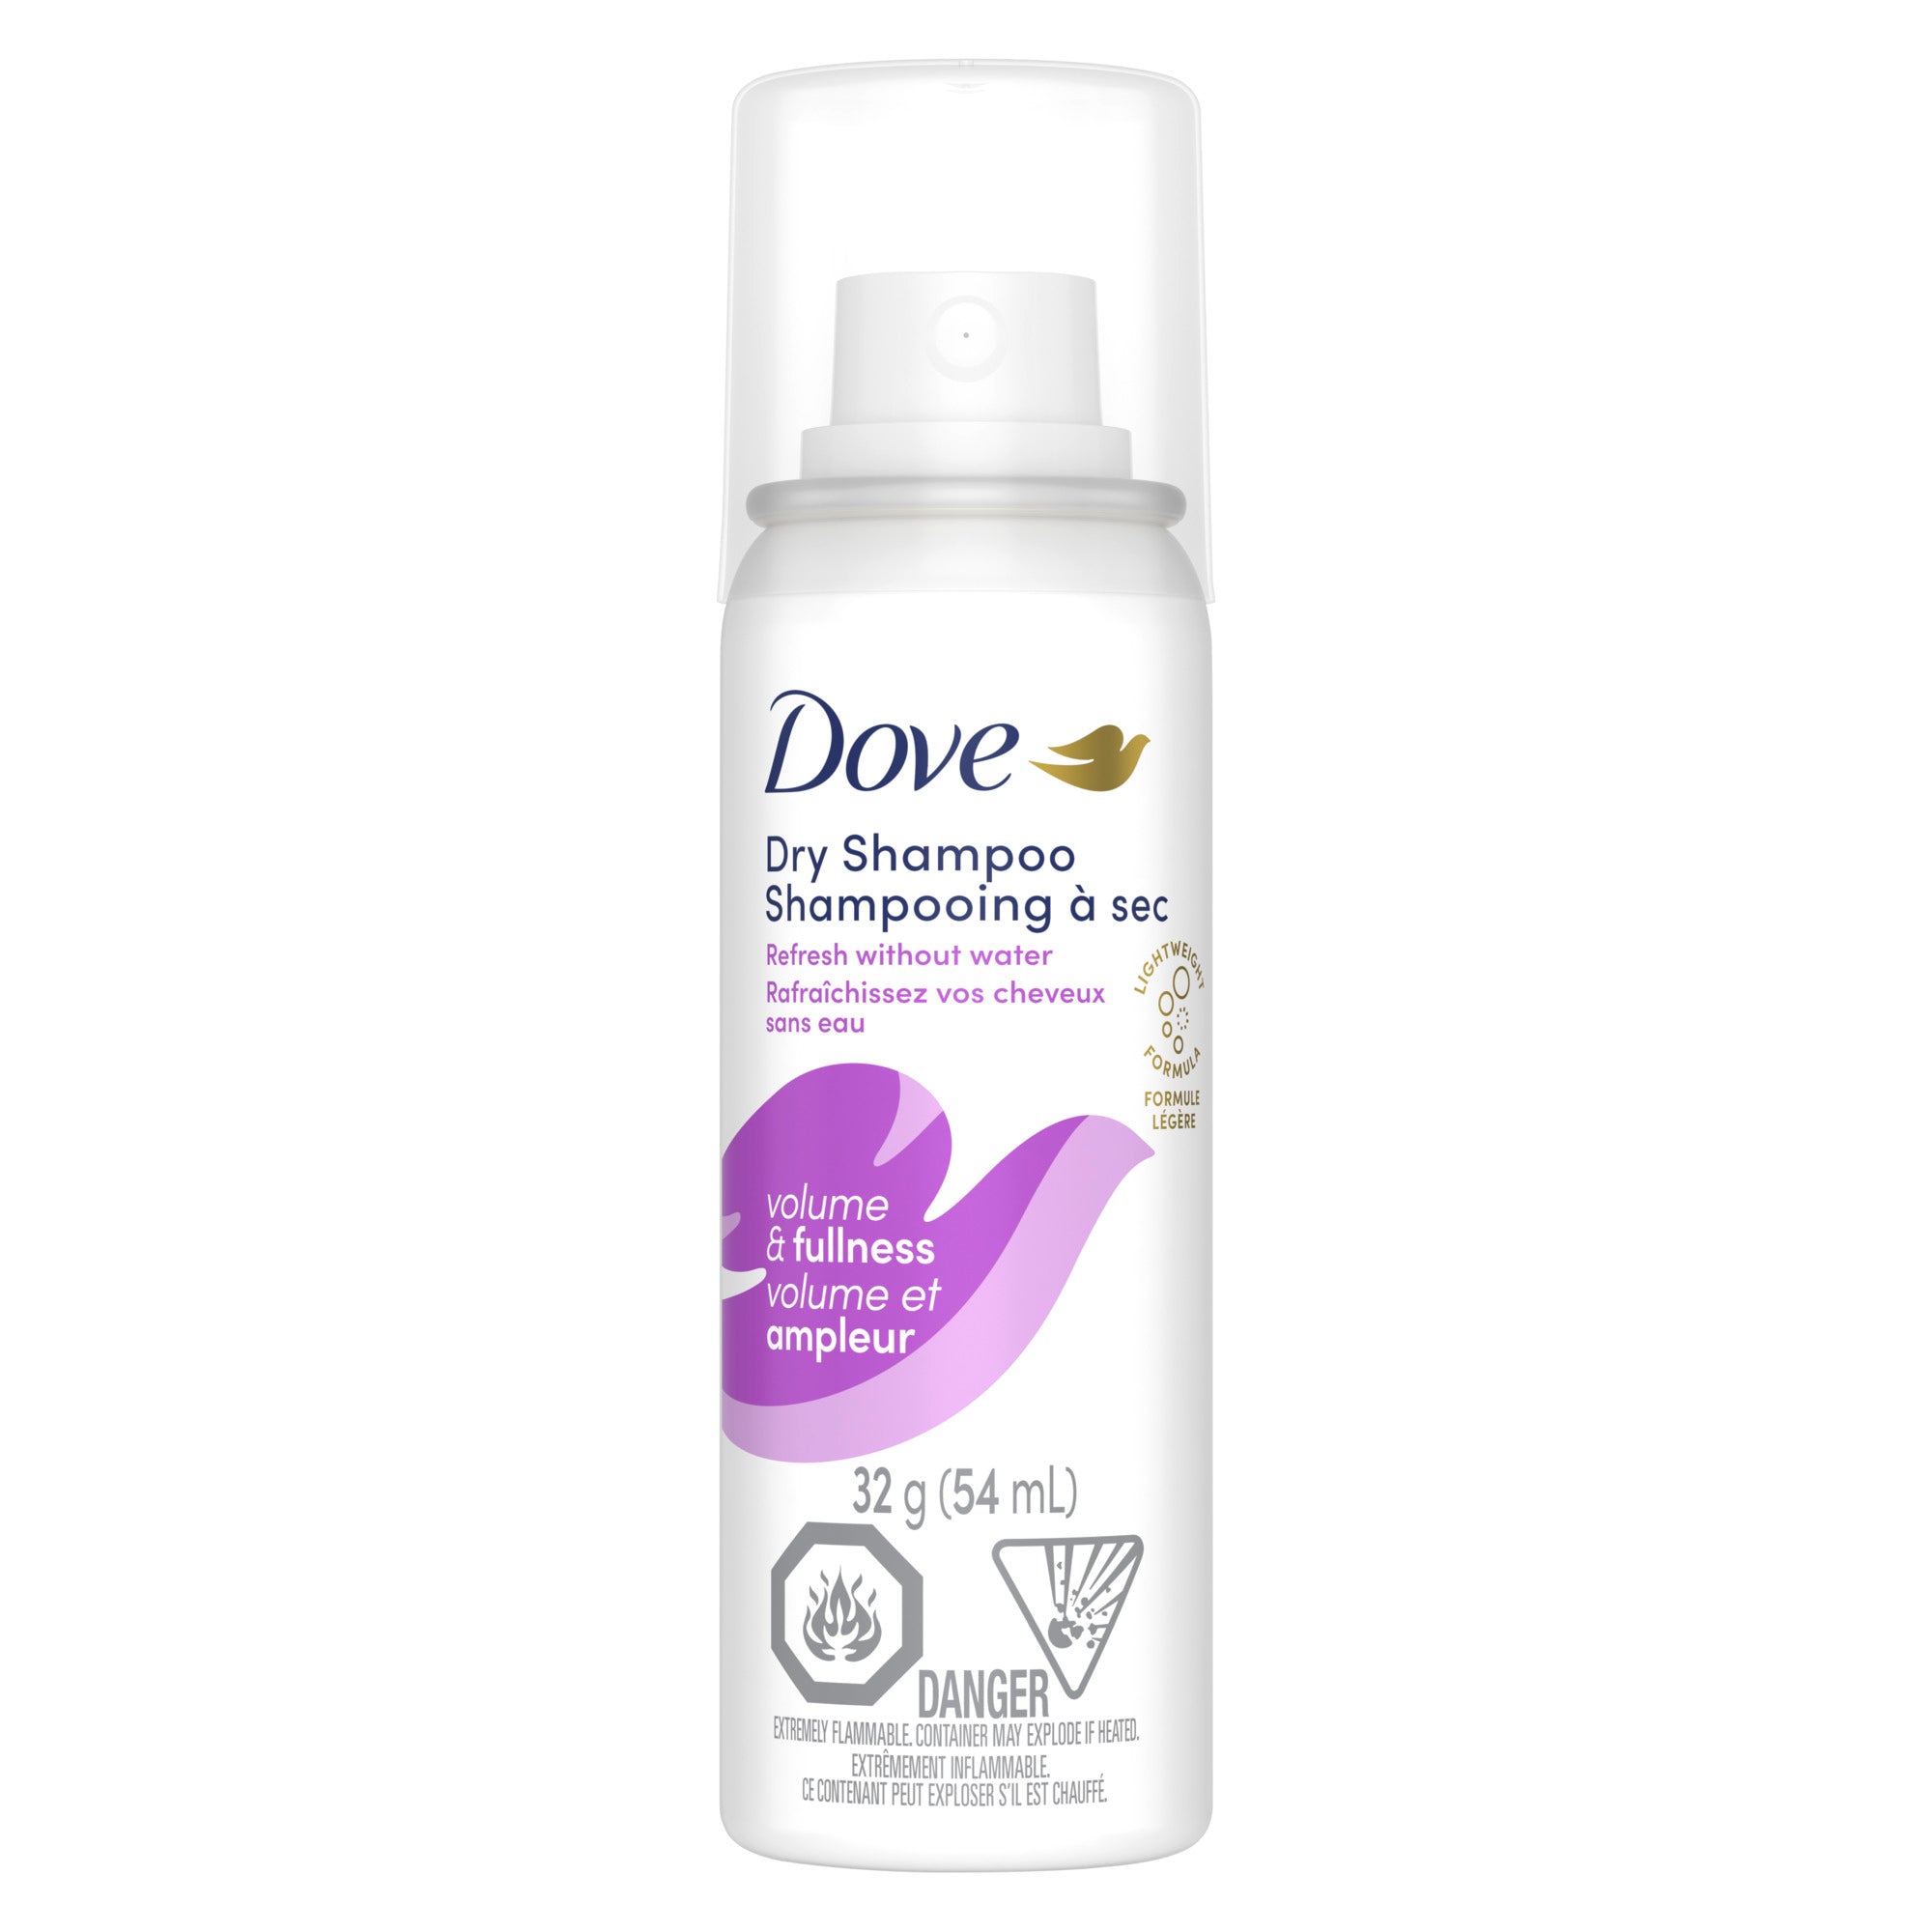 A front view of the white and purple Dove Dry Shampoo 32g (54mL) spray can.